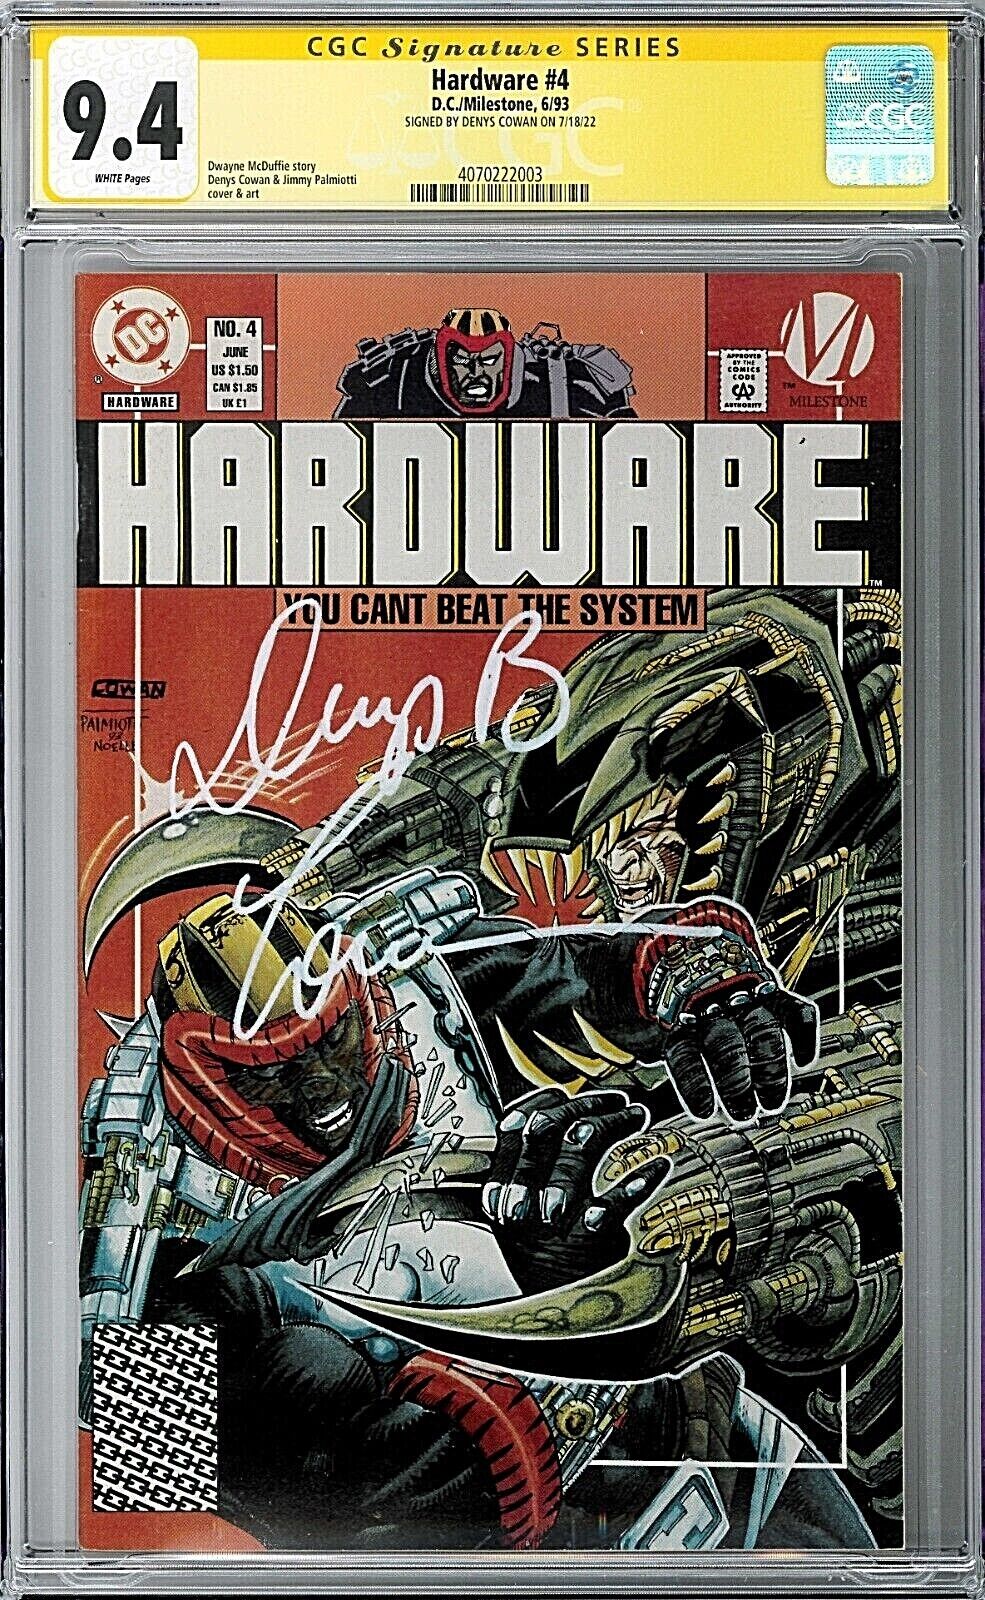 Hardware #4 CGC SS 9.4 (Jun 1993, DC) Jimmy Palmiotti, Signed by Denys Cowan